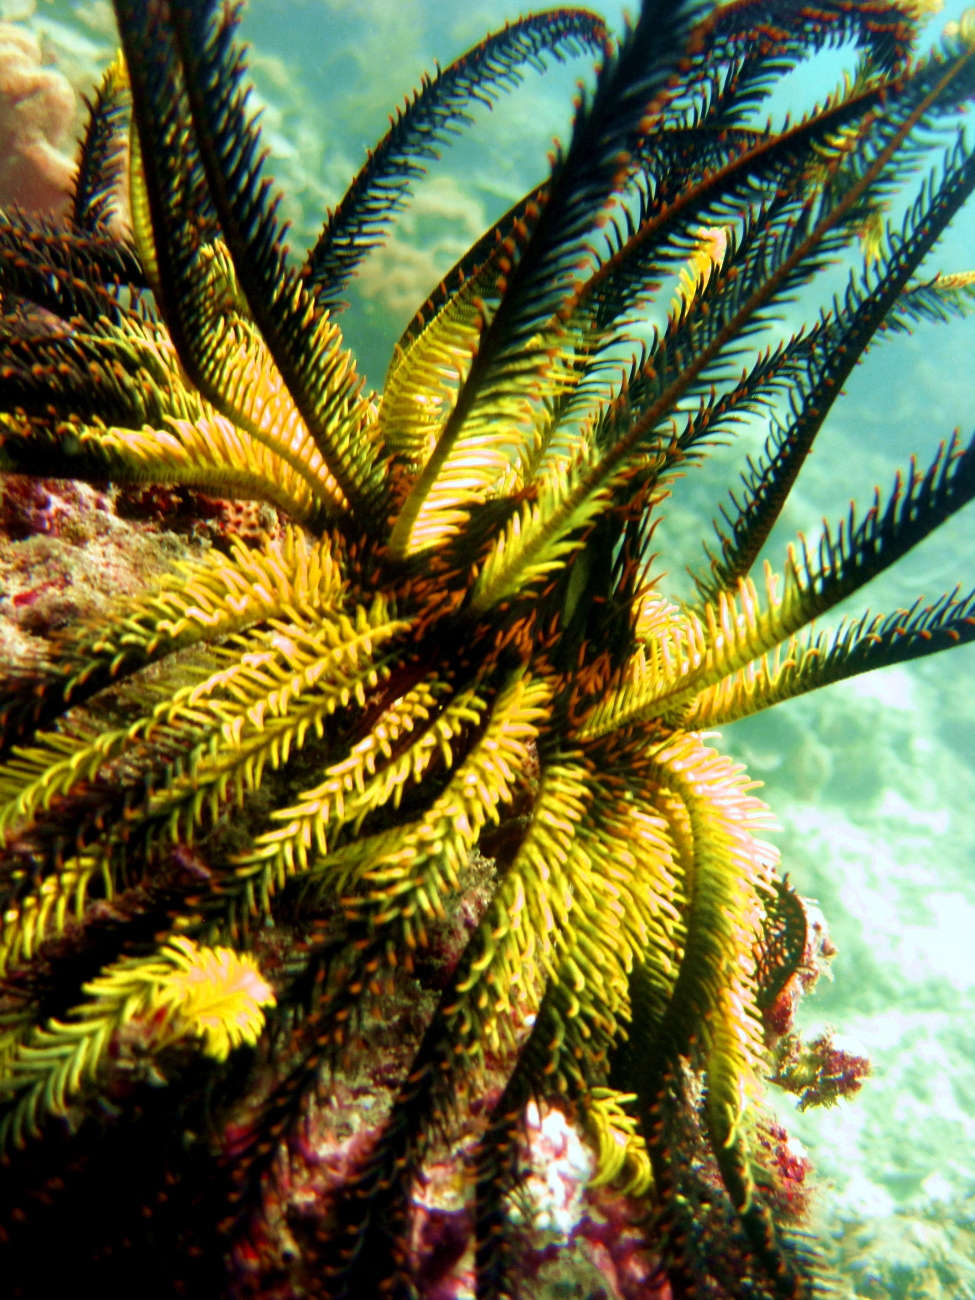 A yellow and black feather star crinoid